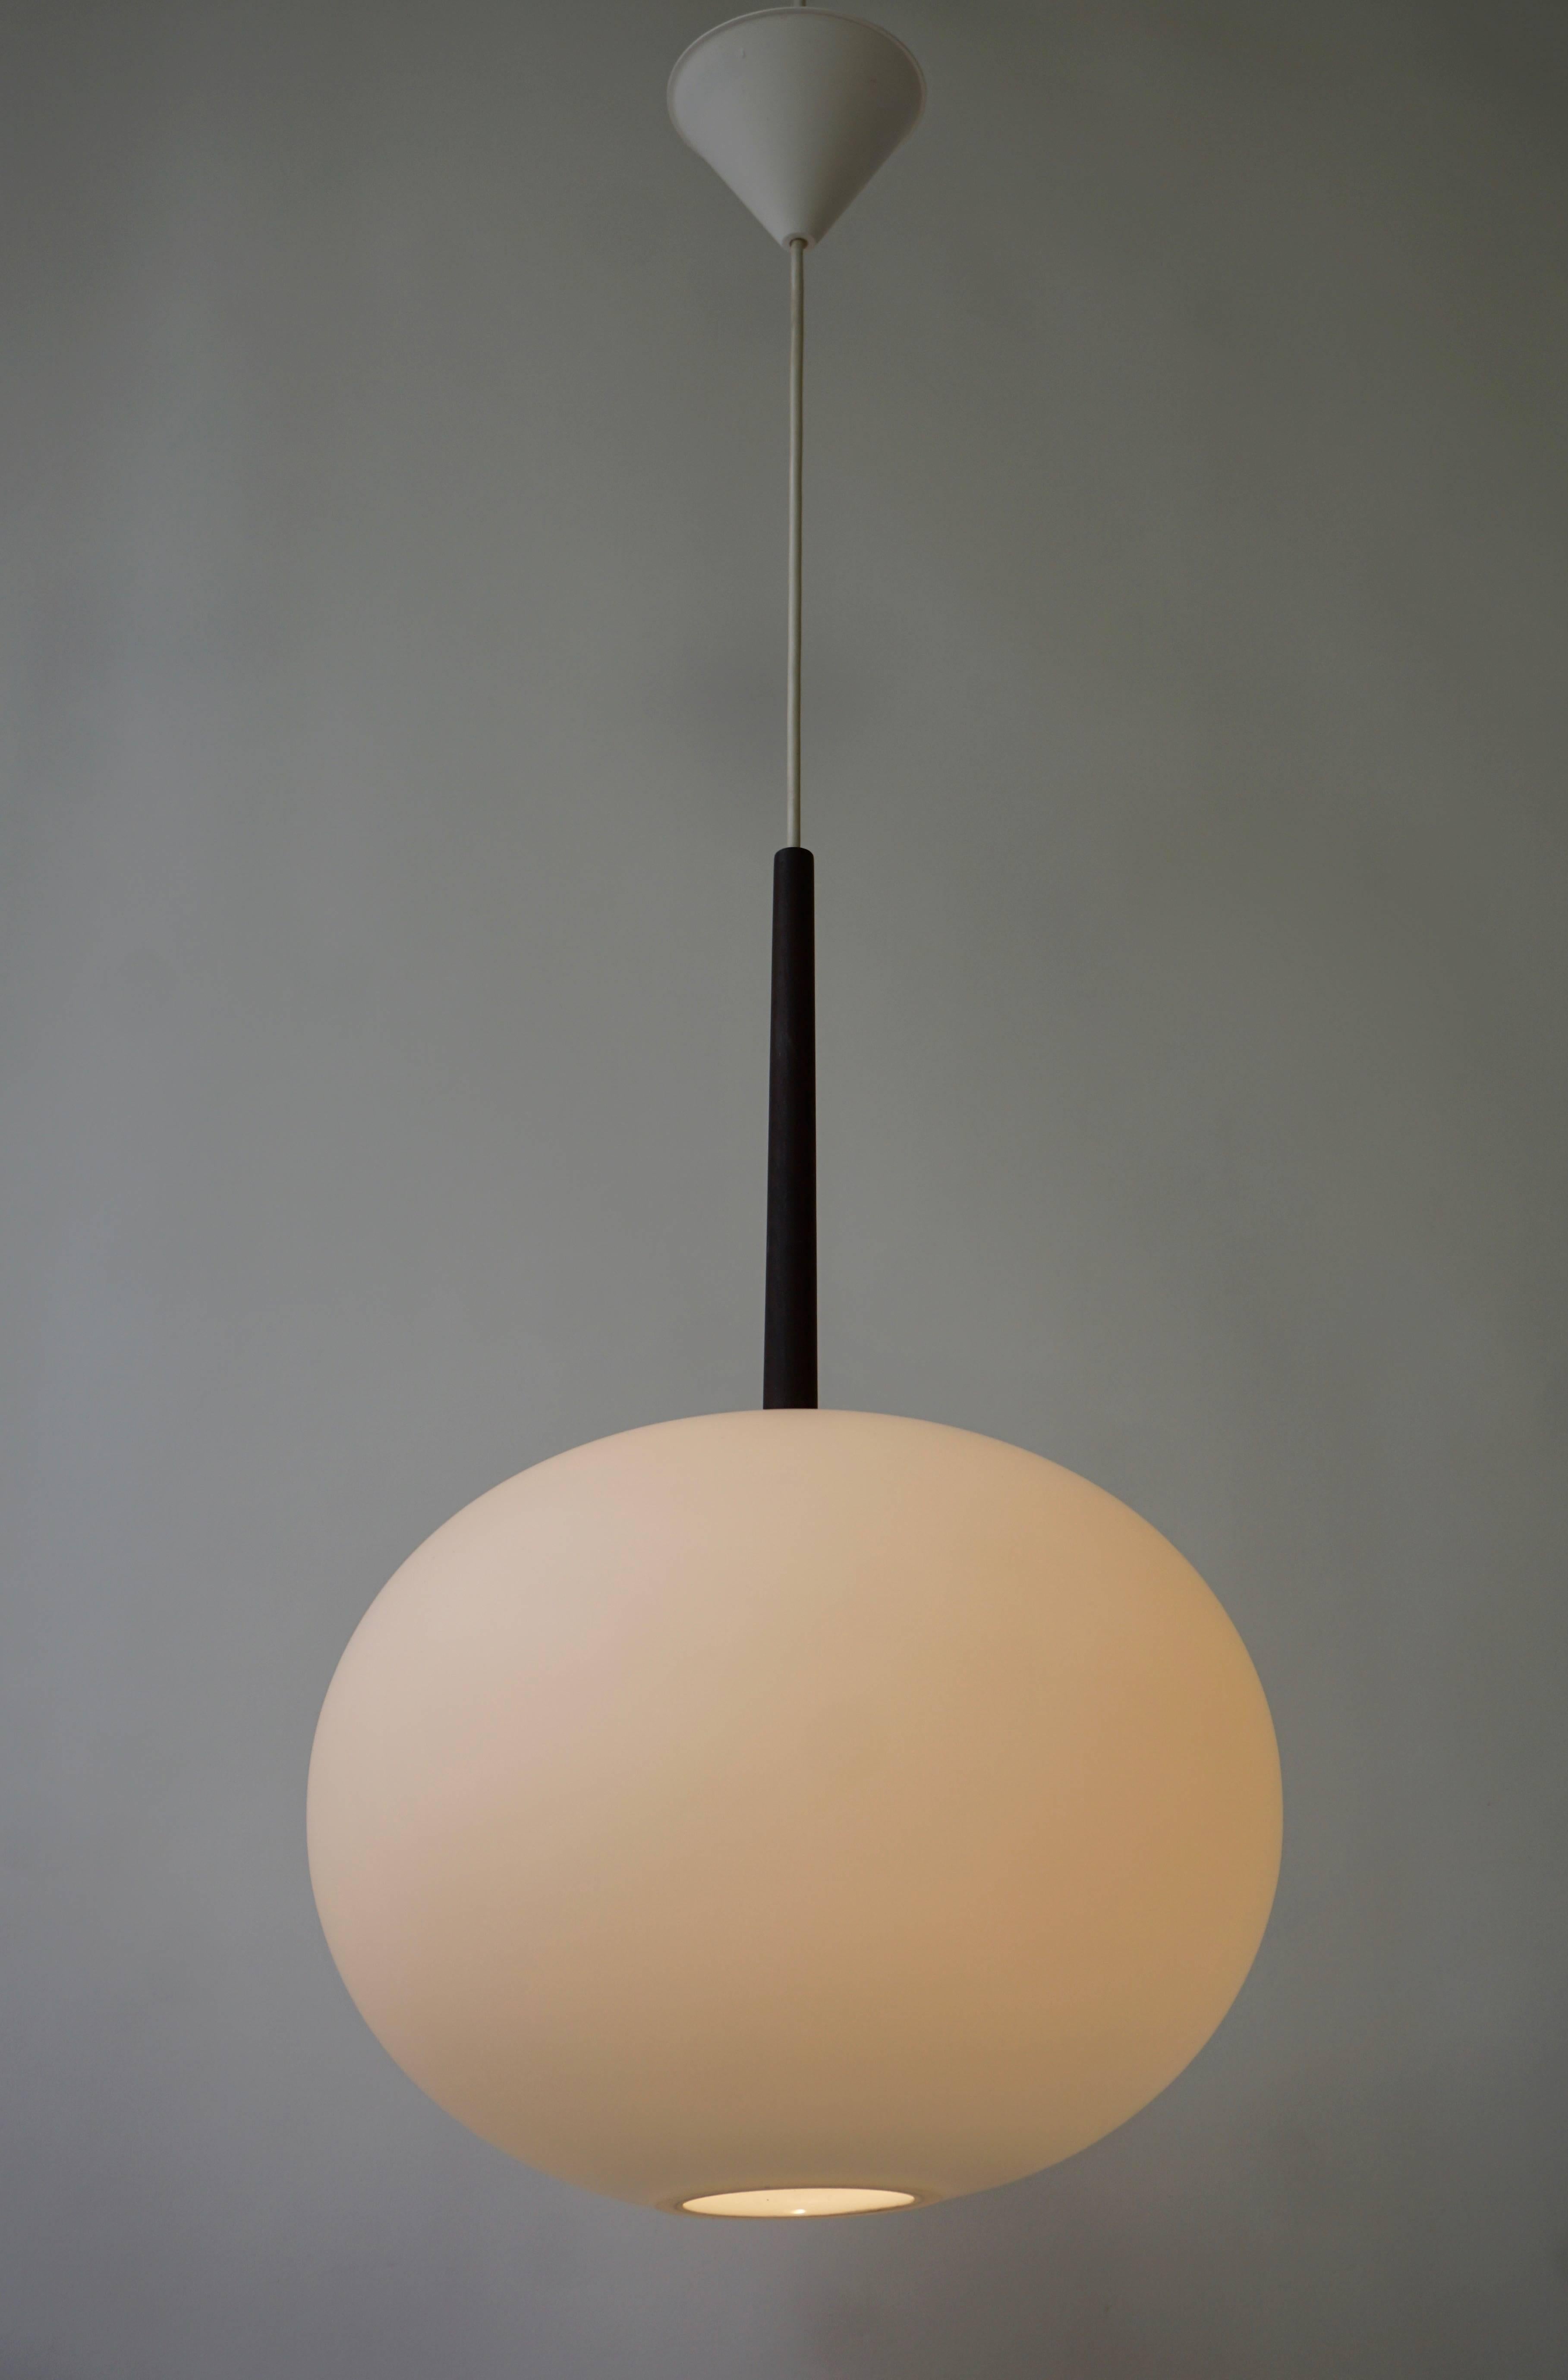 A beautiful pendant in oak and opaline glass by Uno & Östen Kristiansson for Luxus, Sweden. The lamp is suspended by one wire from the canopy and divided by a piece of wood on the shade. The shade is made of opaline glass. The round shade creates a